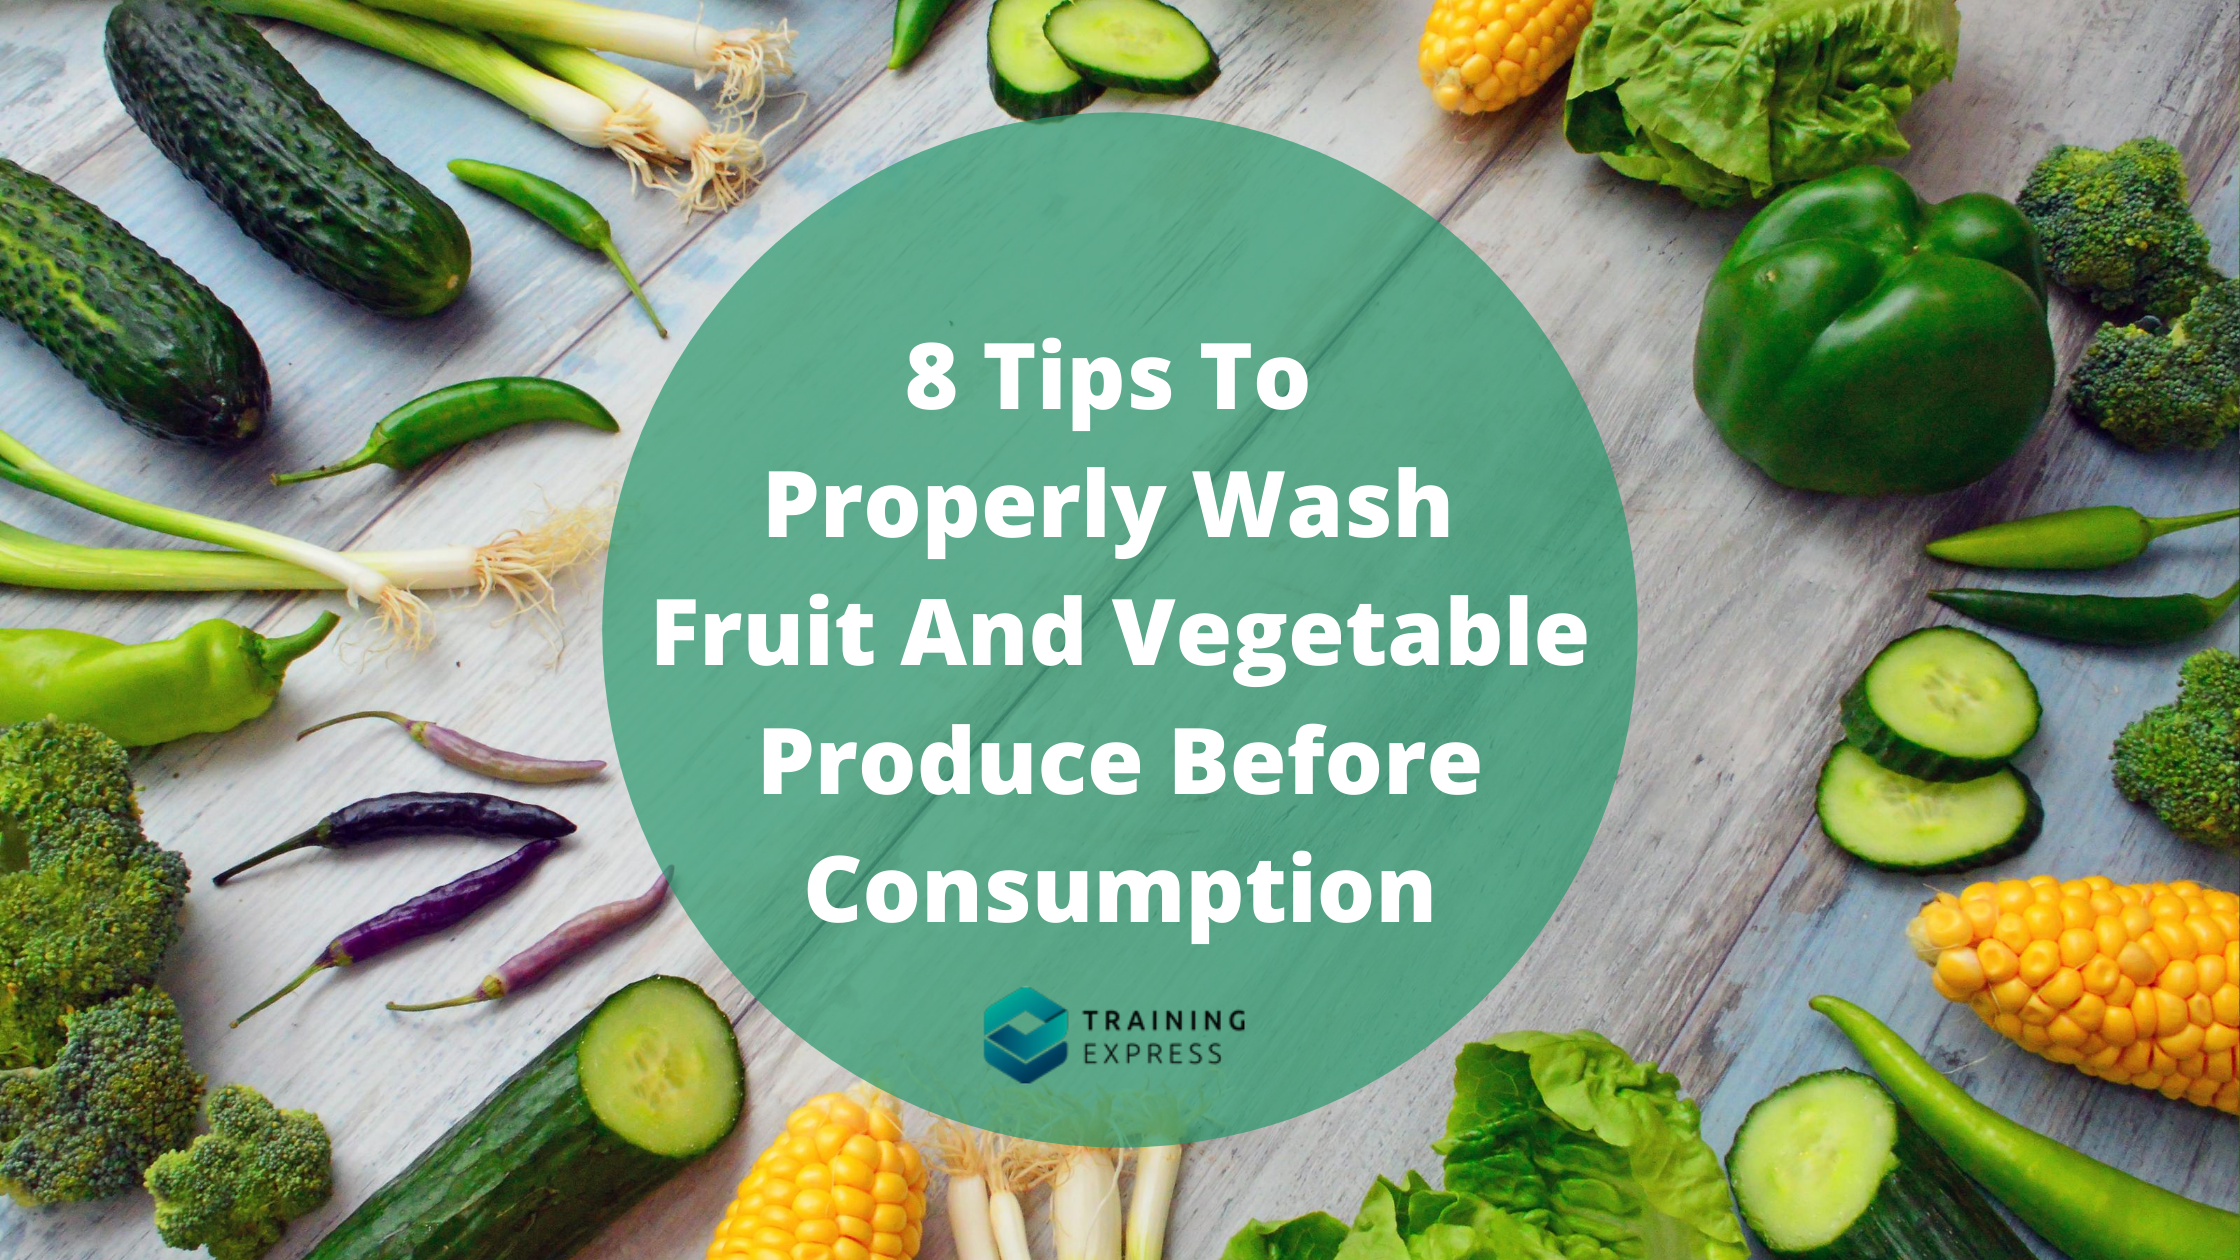 Food Safety Tips for Fruit and Vegetables